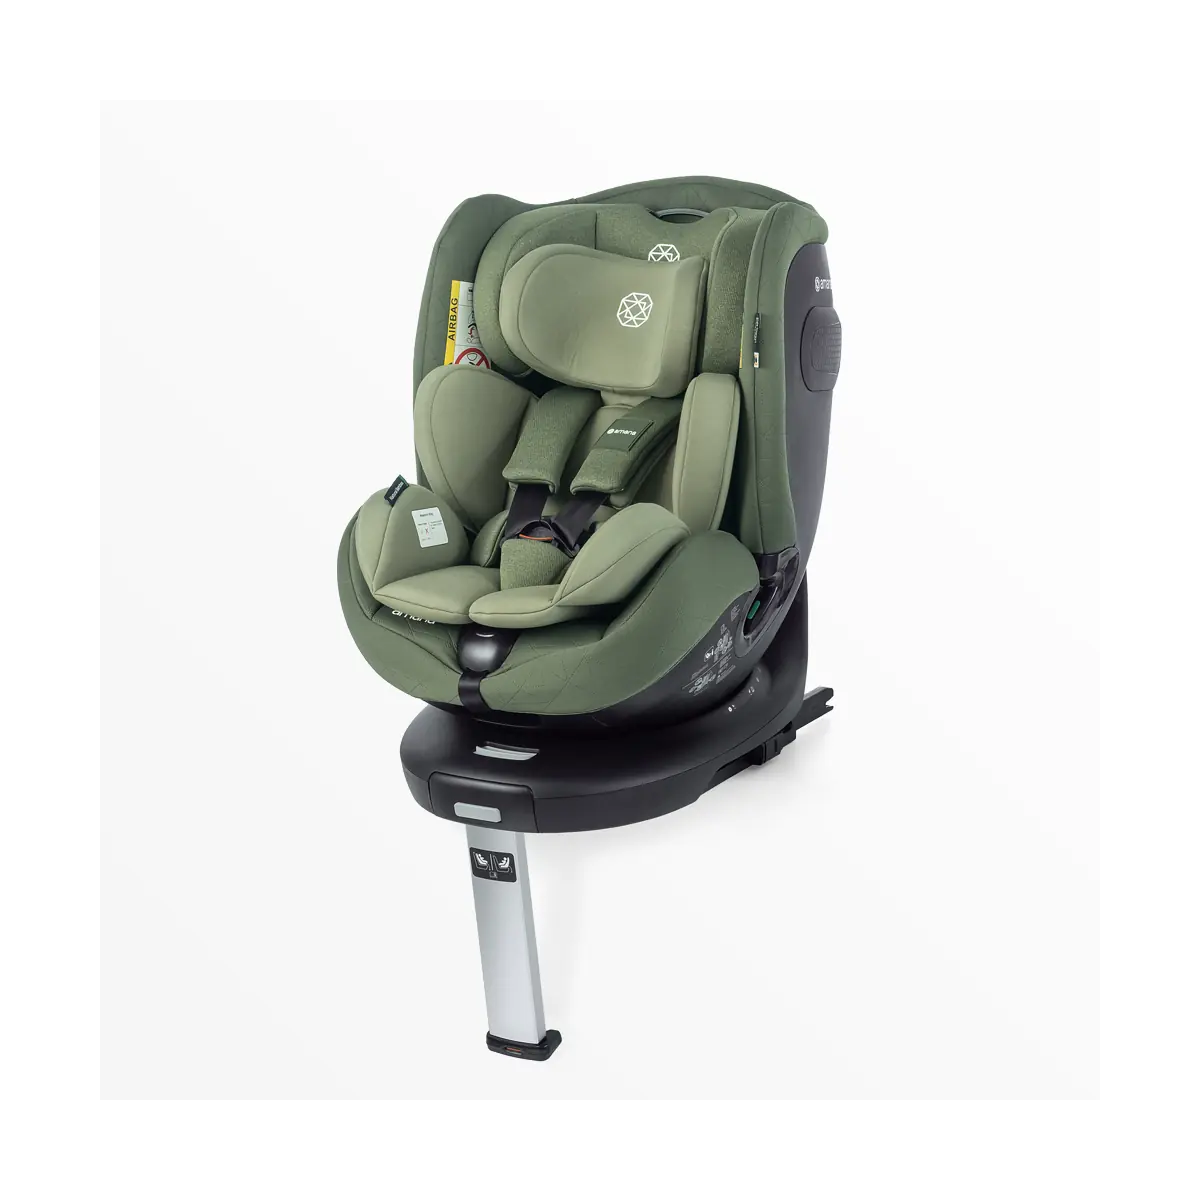 Image of Amana Siena Twist+ 360 Spin ALL STAGE i-Size Group 0+/1/2/3 Car Seat - Sage Green (Exclusive to KK)